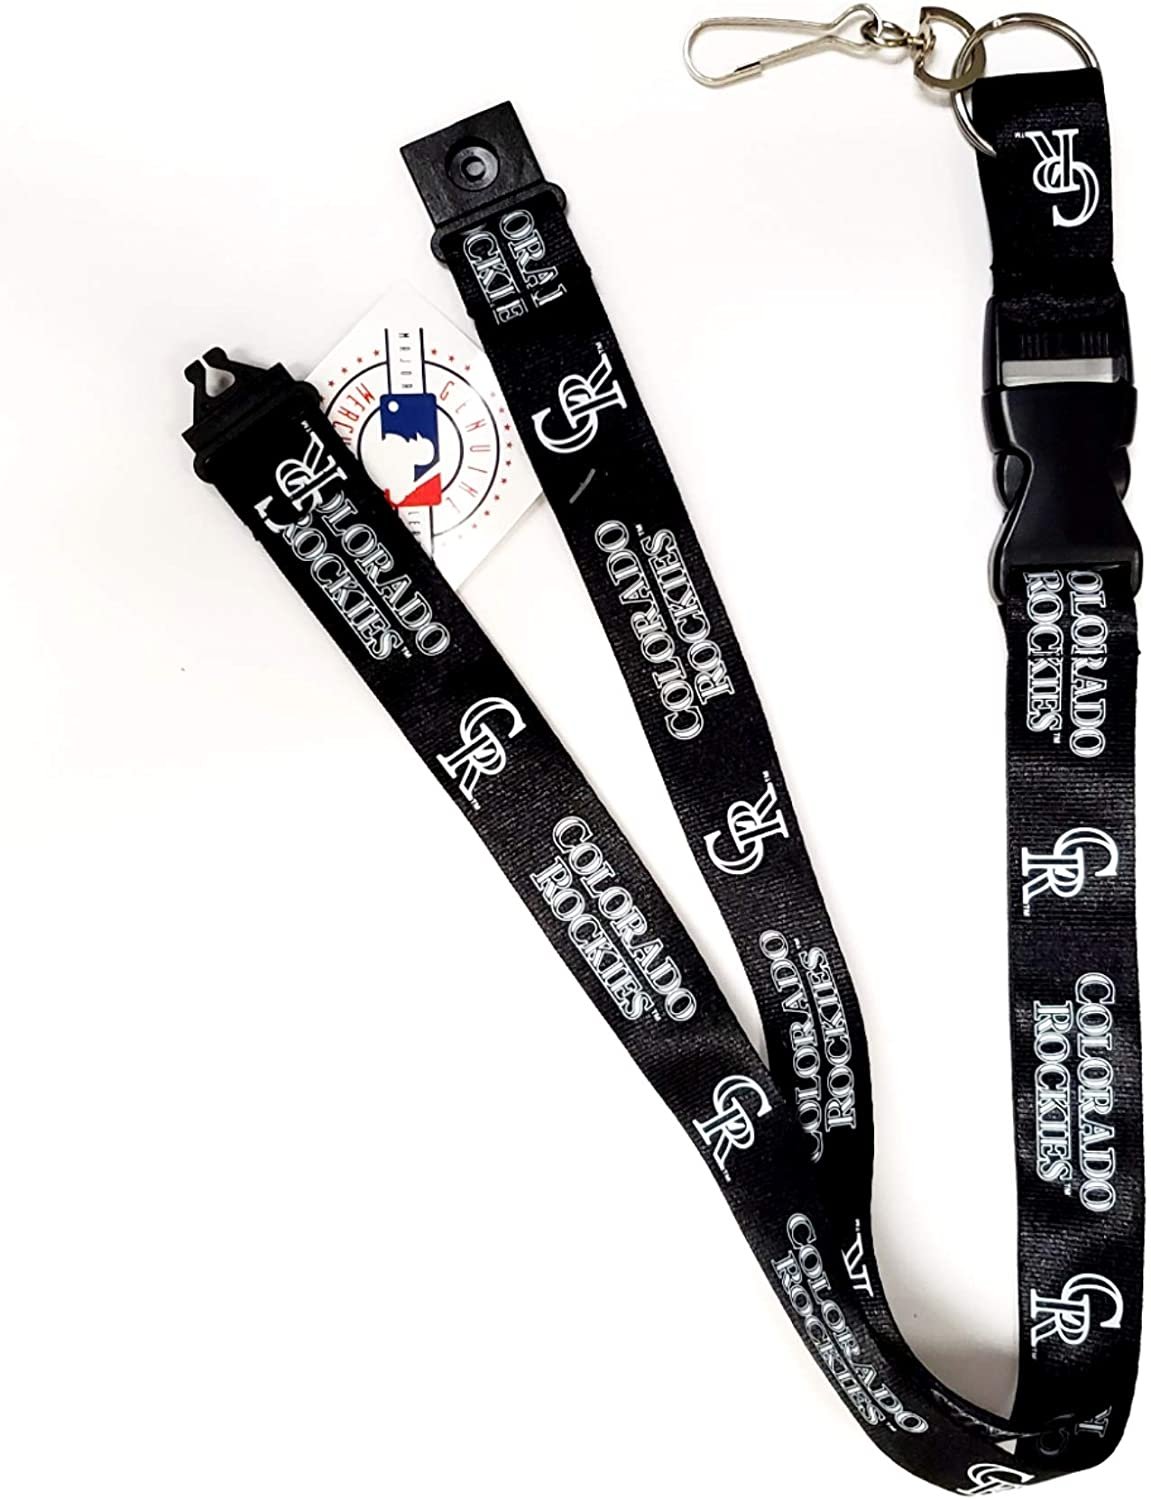 Colorado Rockies Blackout Design Premium Lanyard Keychain Double Sided Breakaway Safety Design Adult 18 Inch